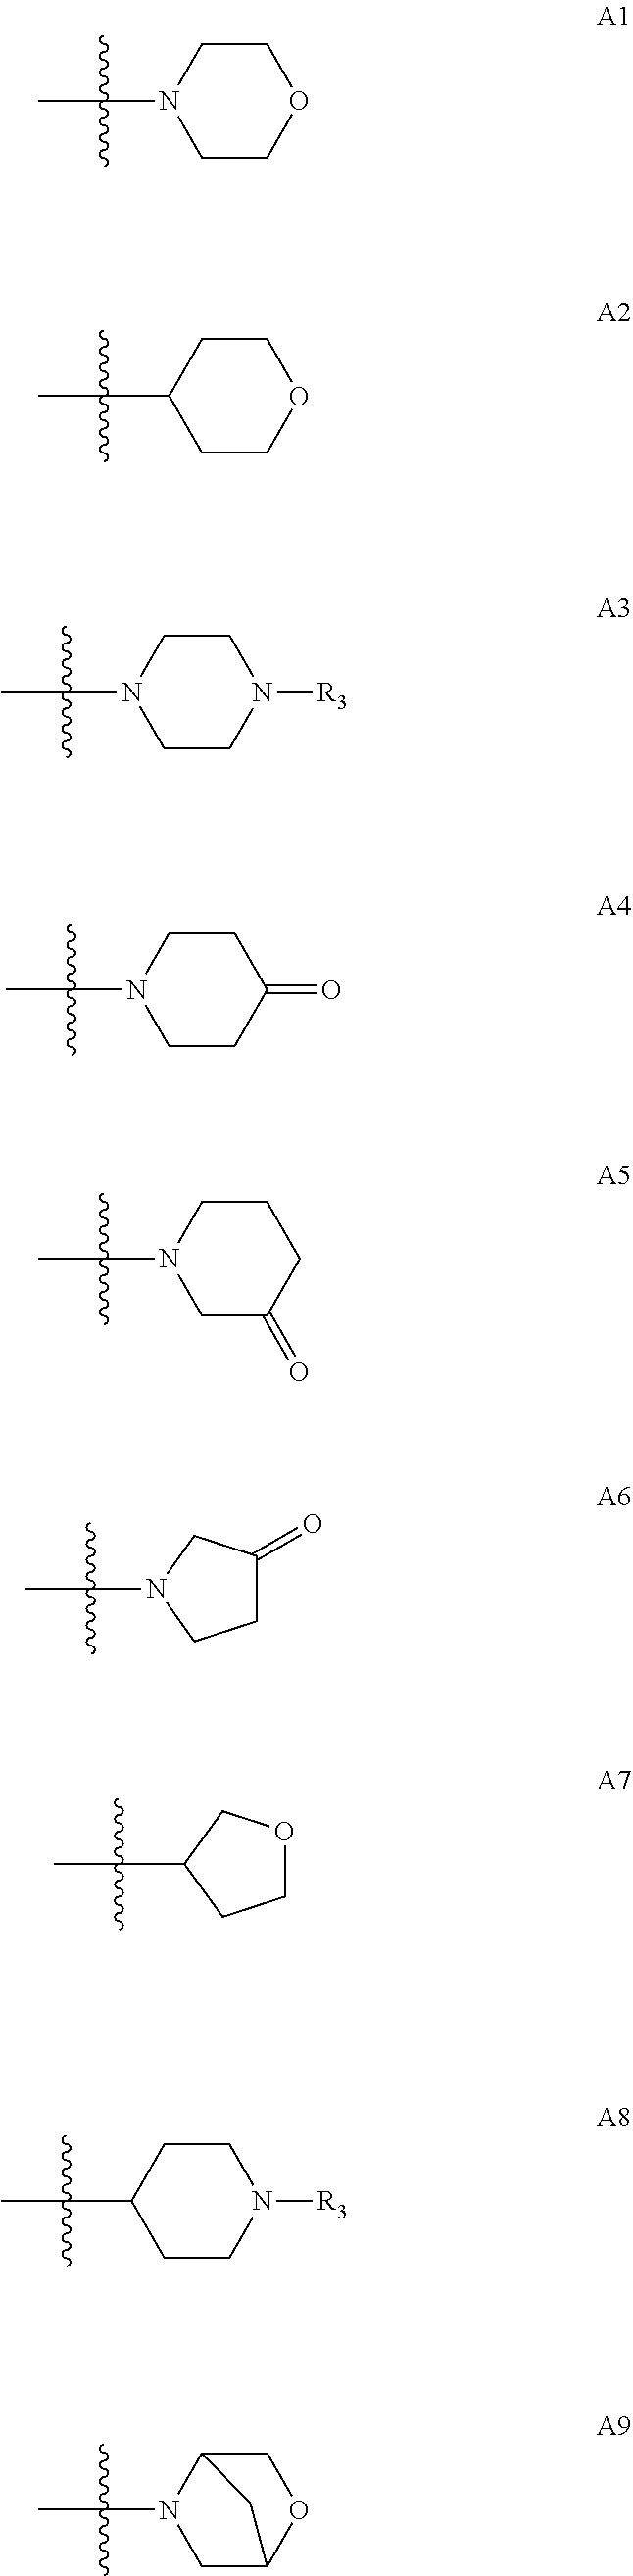 Di-substituted phenyl compounds